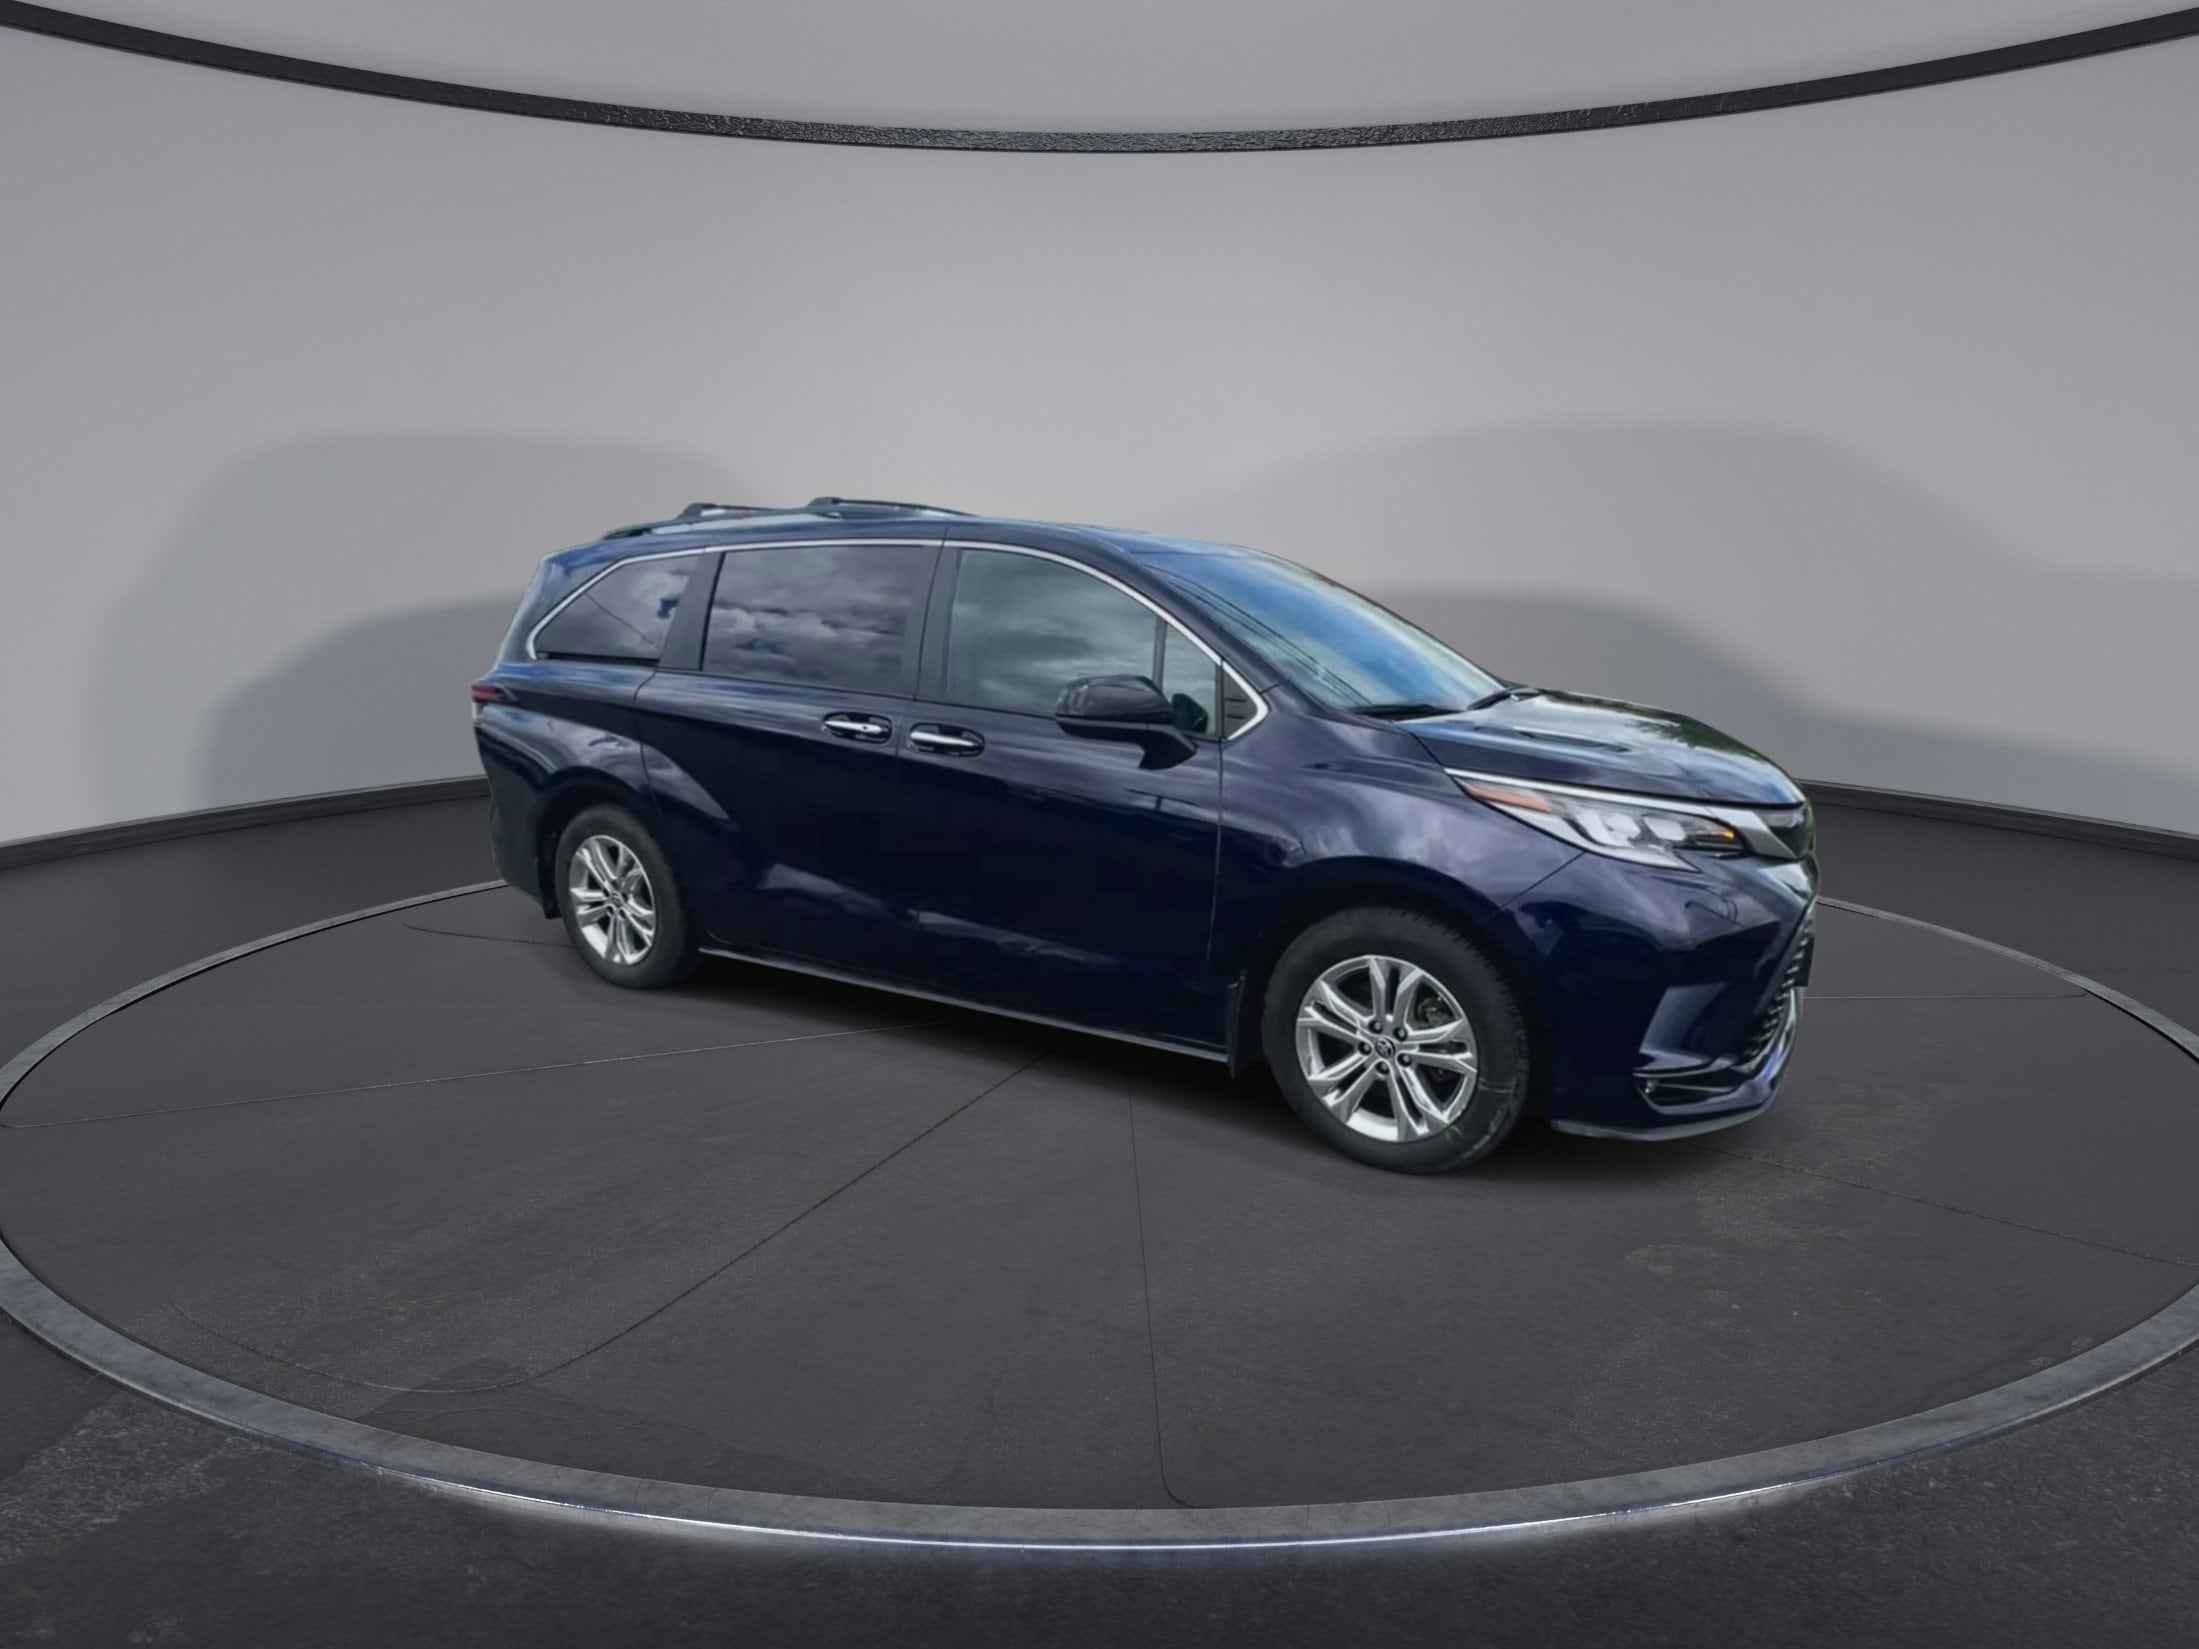 Used 2022 Toyota Sienna XSE with VIN 5TDDSKFC4NS071859 for sale in Berlin, VT